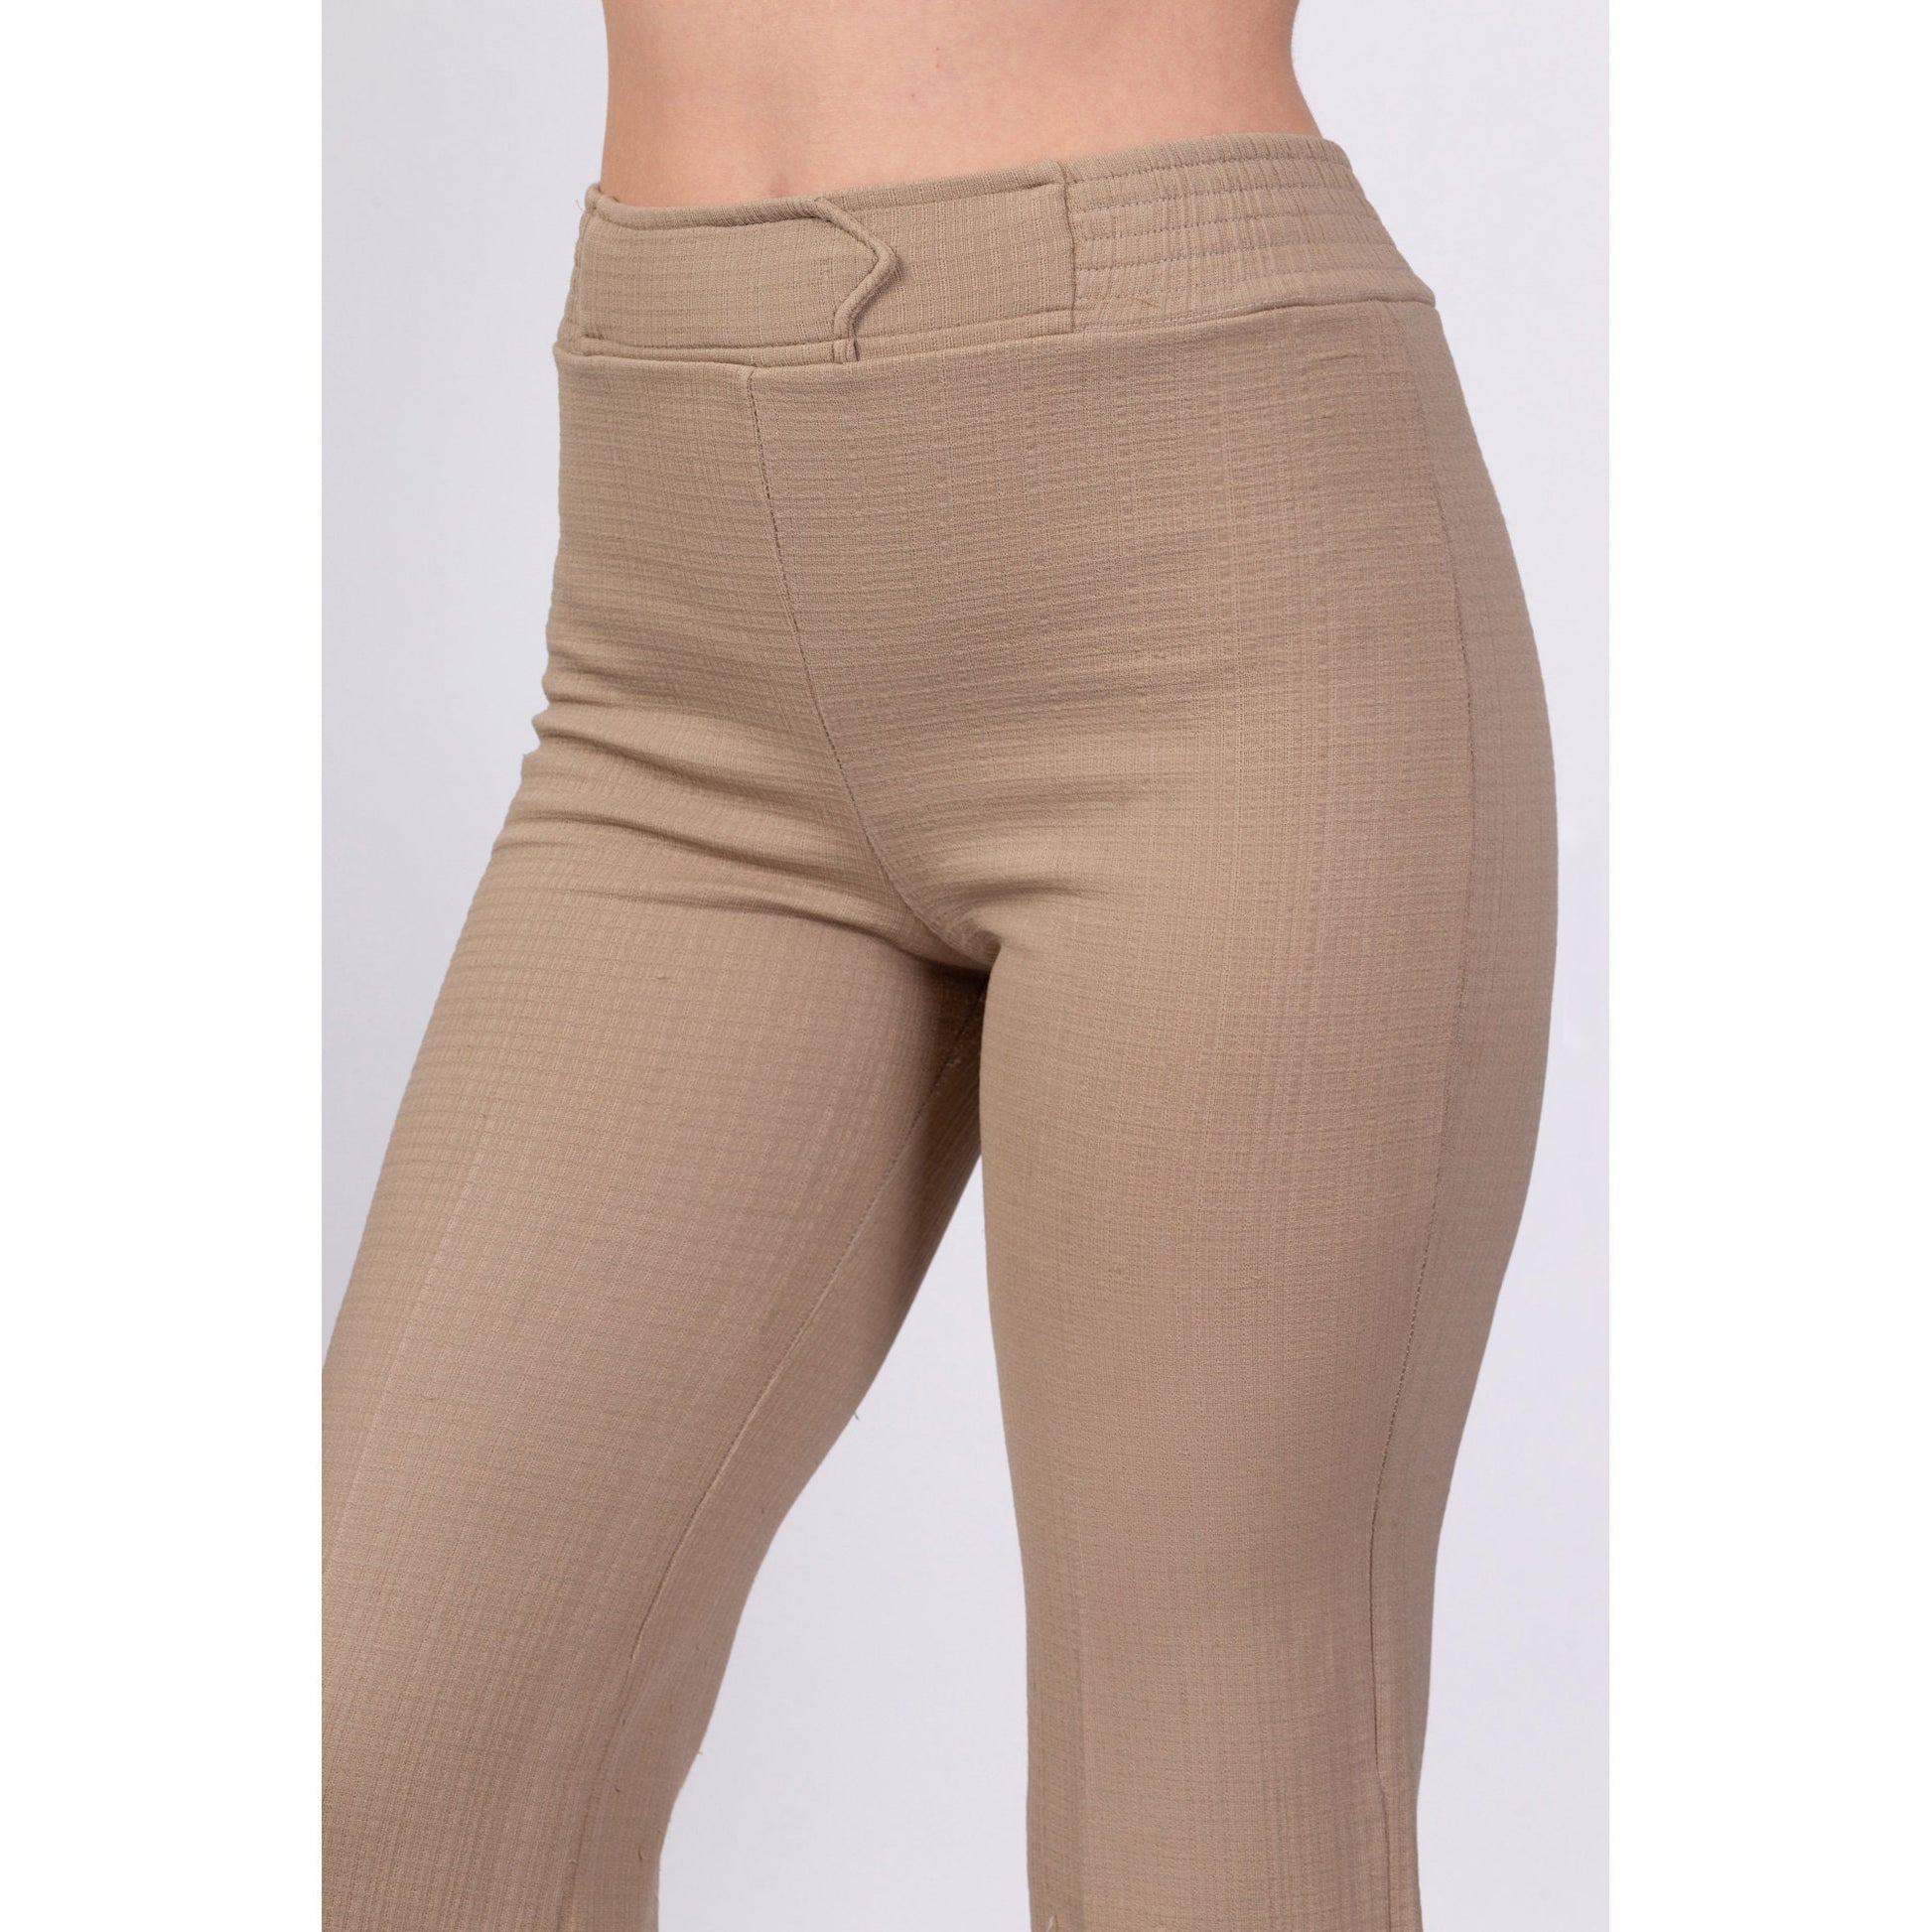 70s Taupe High Waisted Flared Pants - XS to Petite Small, 25-27